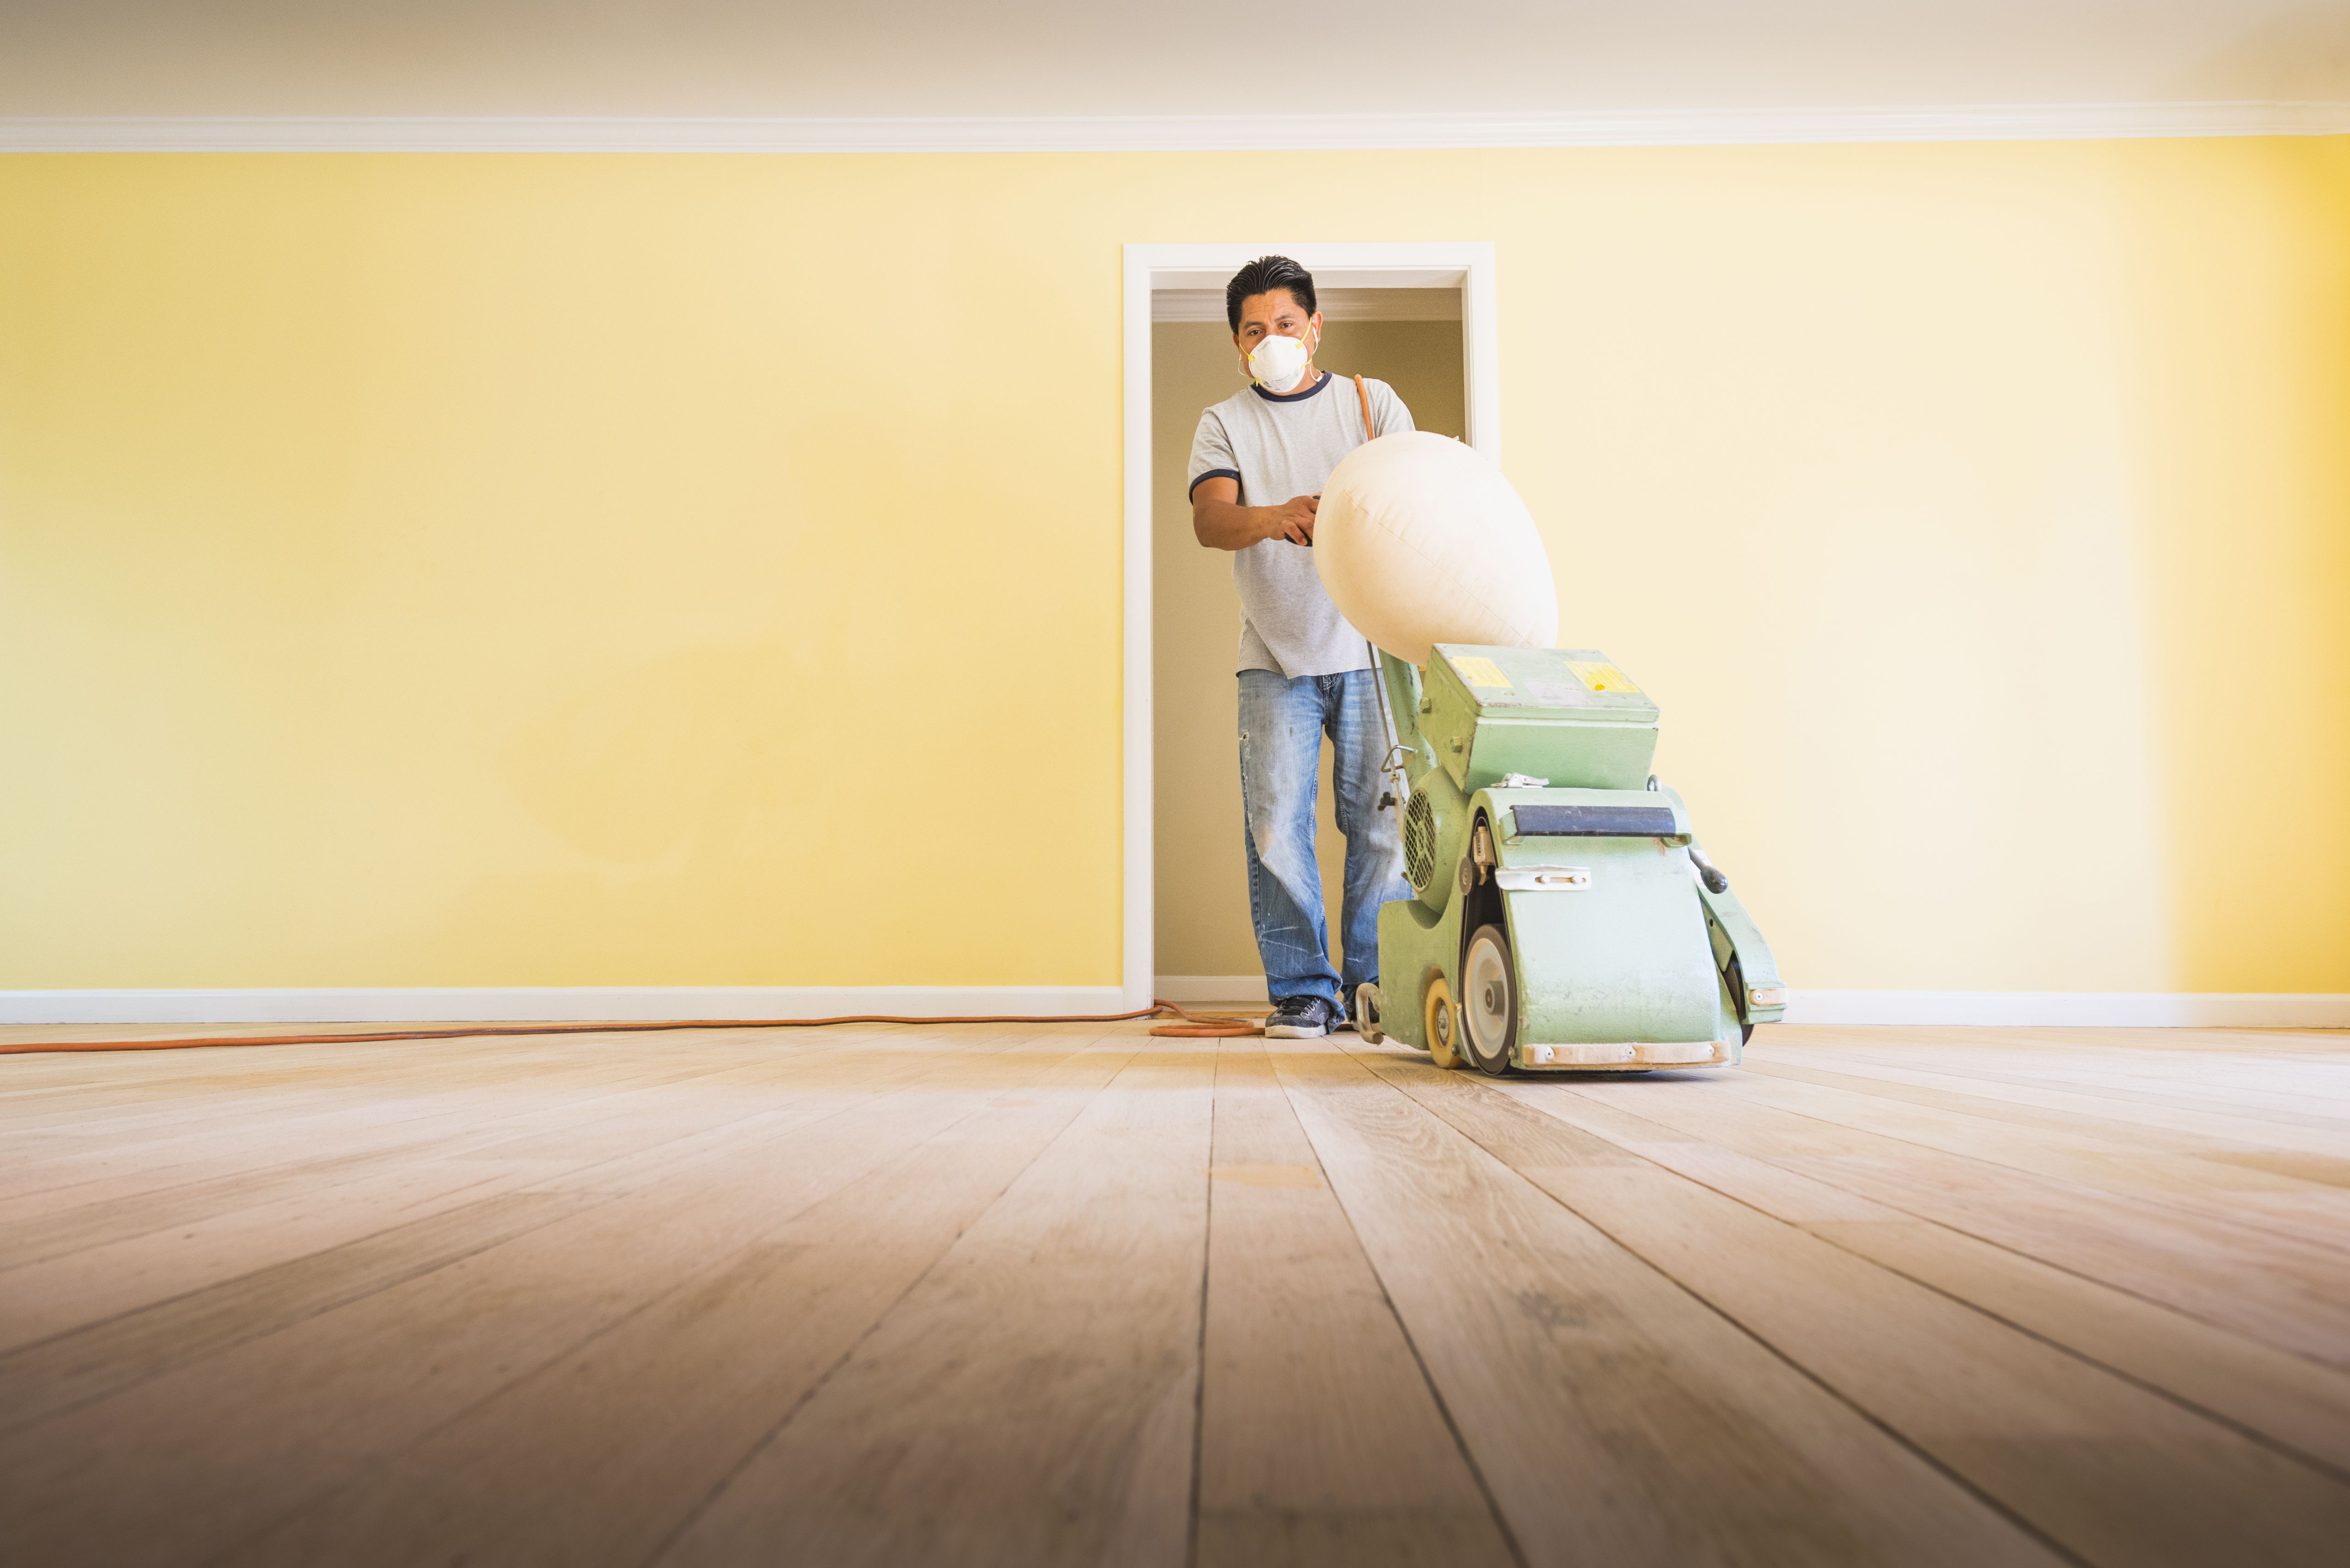 re sanding hardwood floors of should you paint walls or refinish floors first in floorsandingafterpainting 5a8f08dfae9ab80037d9d878